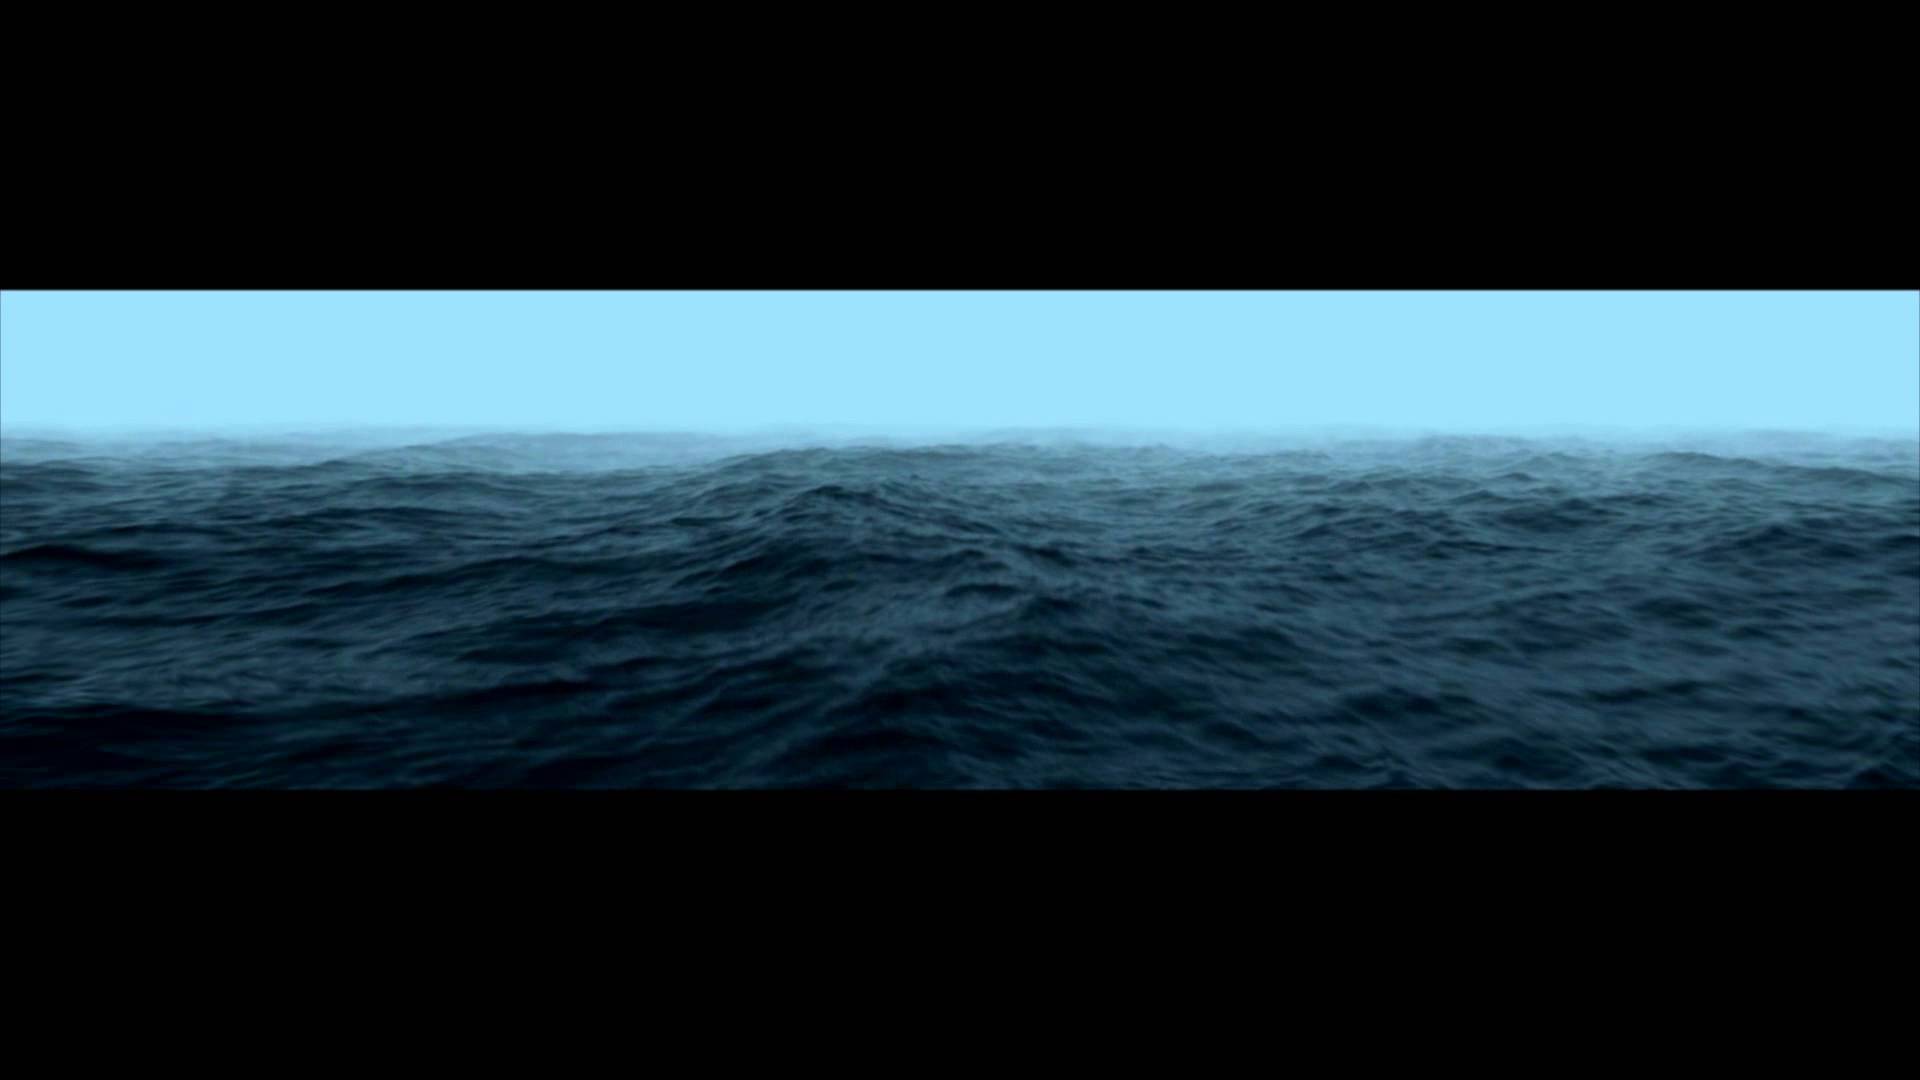 HD Final Render Oceans 3D Max Animation - YouTube